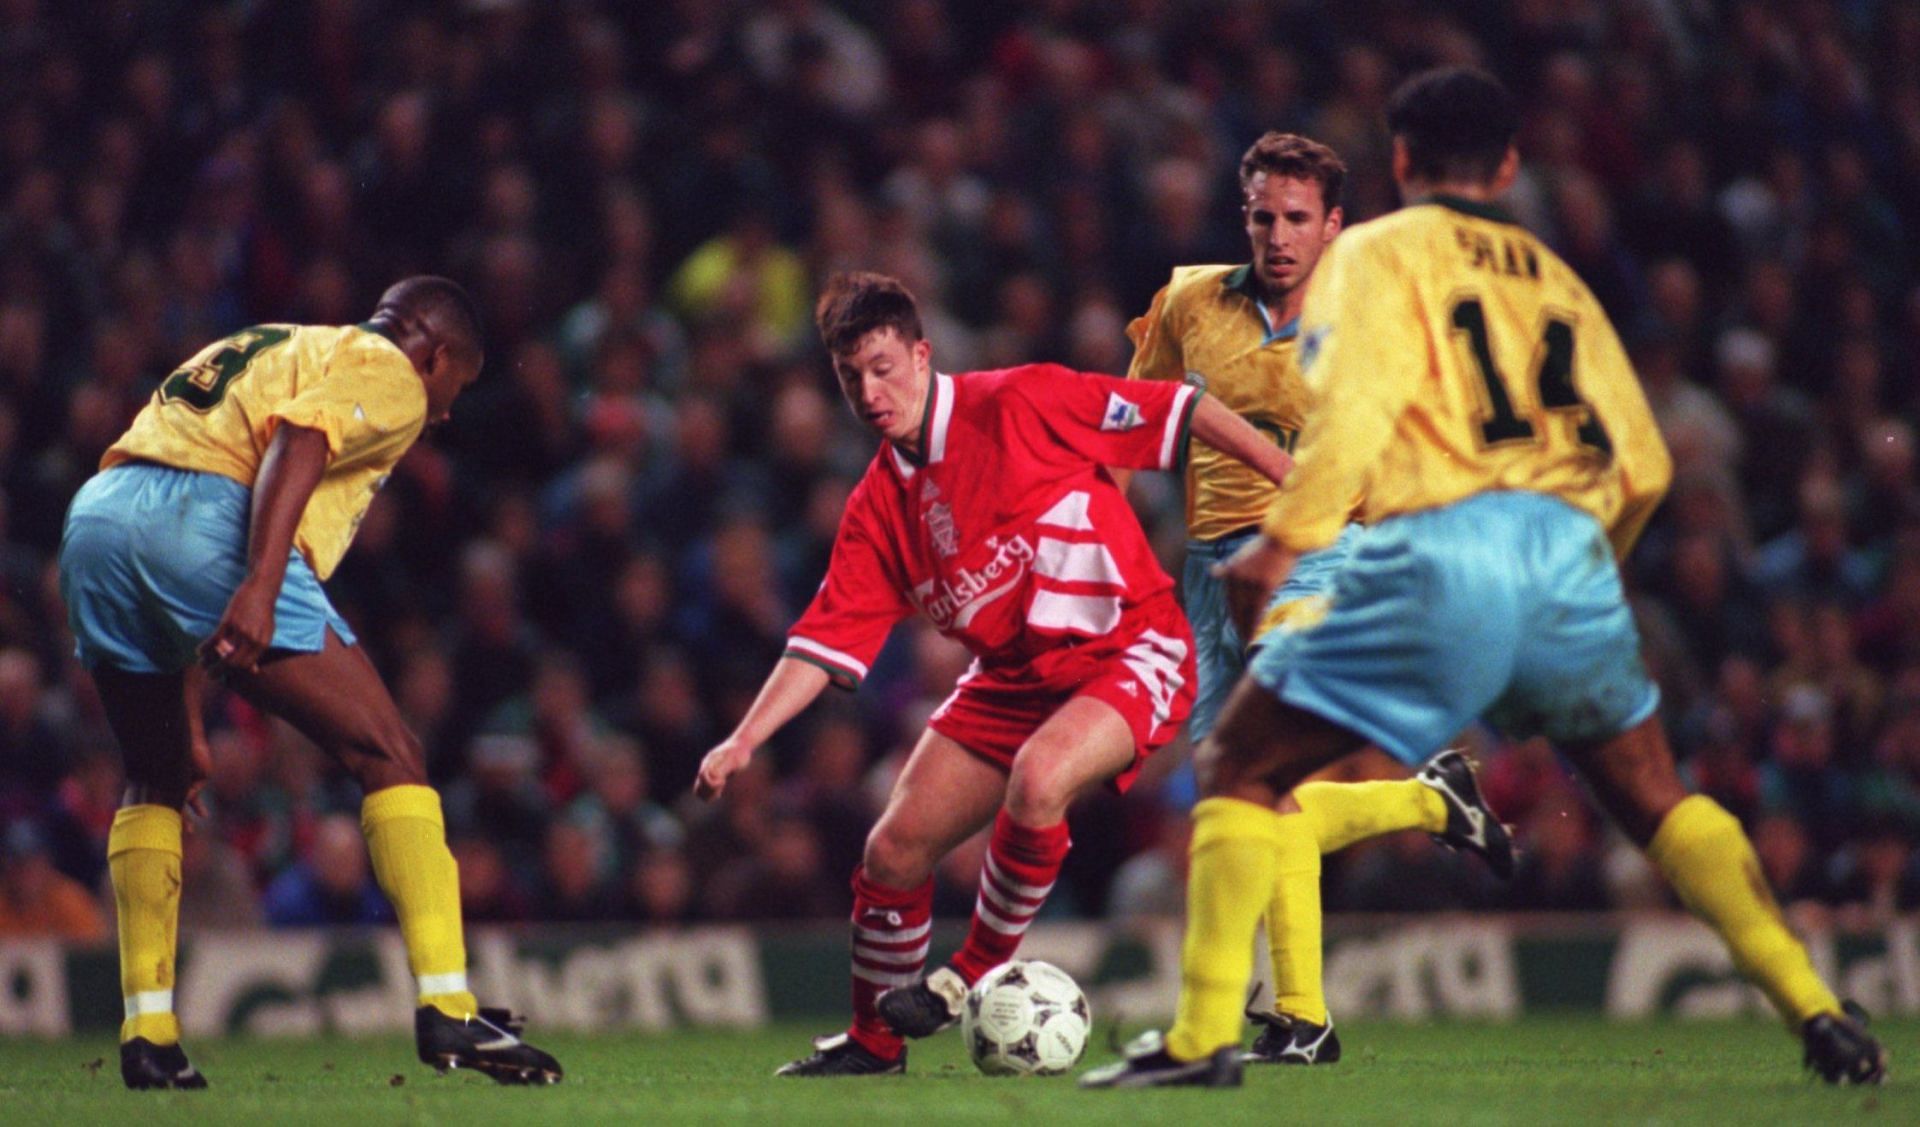 Robbie Fowler was a goal-scoring machine with Liverpool